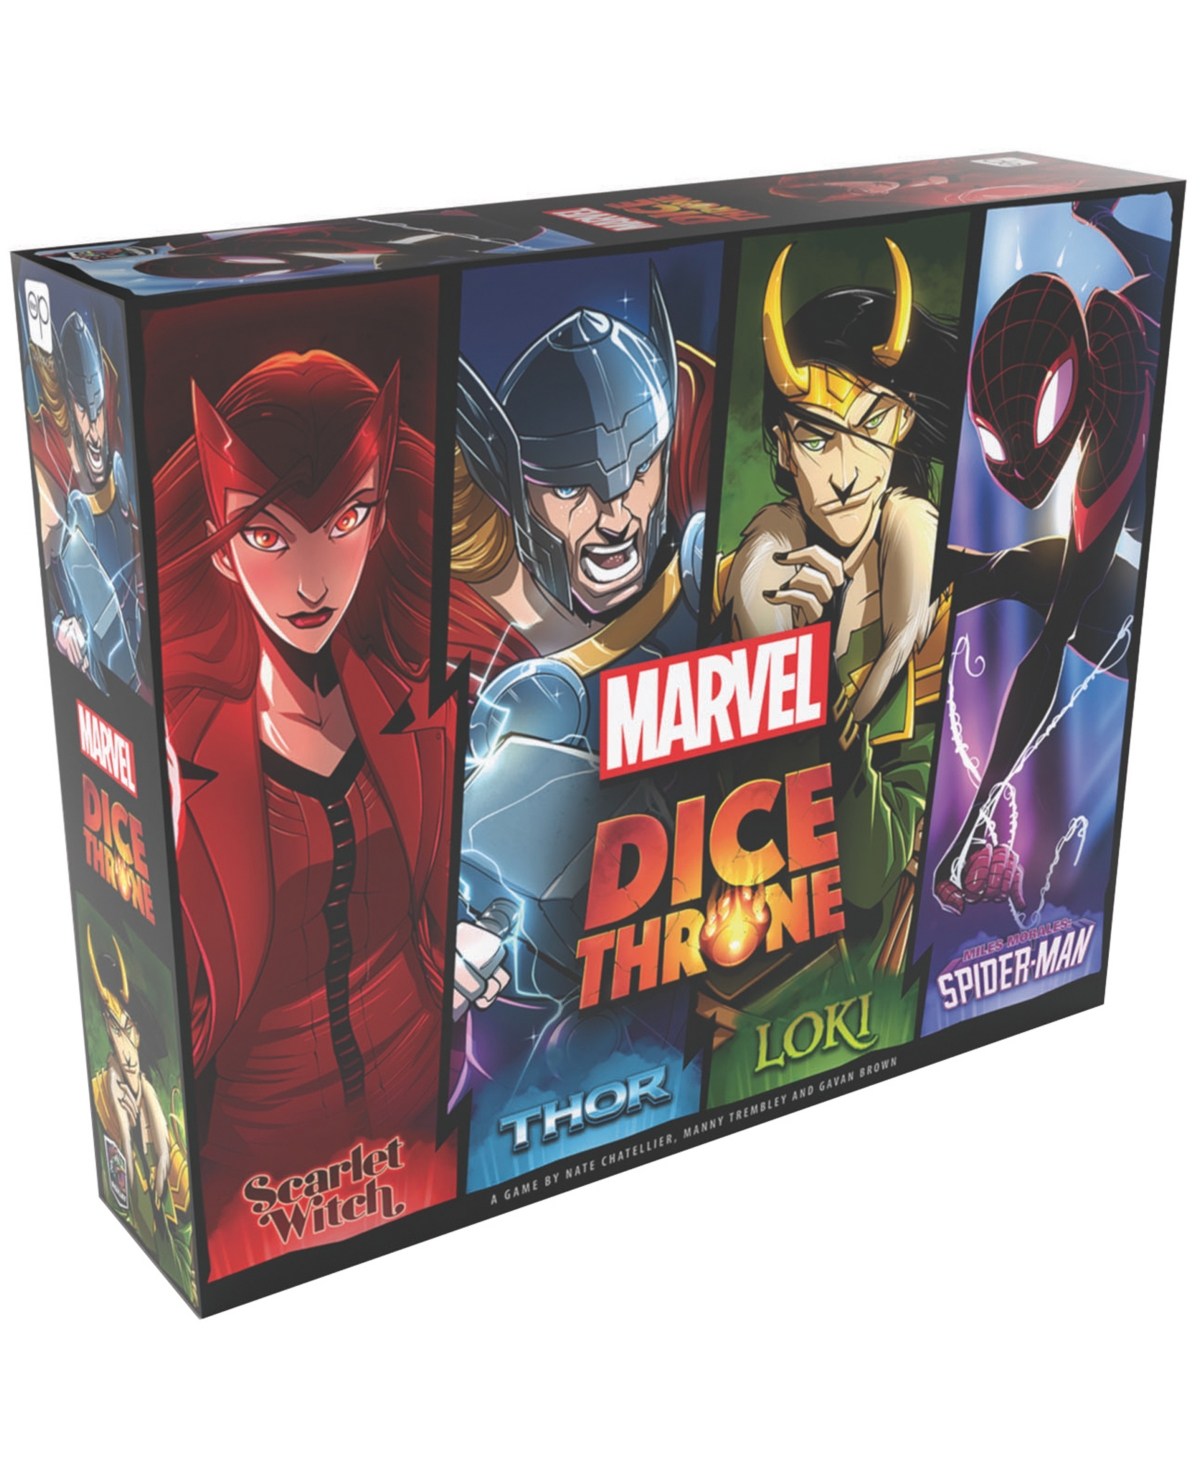 University Games Kids' Usaopoly Marvel Dice Throne 4-hero Scarlet Witch, Thor, Loki, Spider-man Box Set, 211 Piece In Multi Color